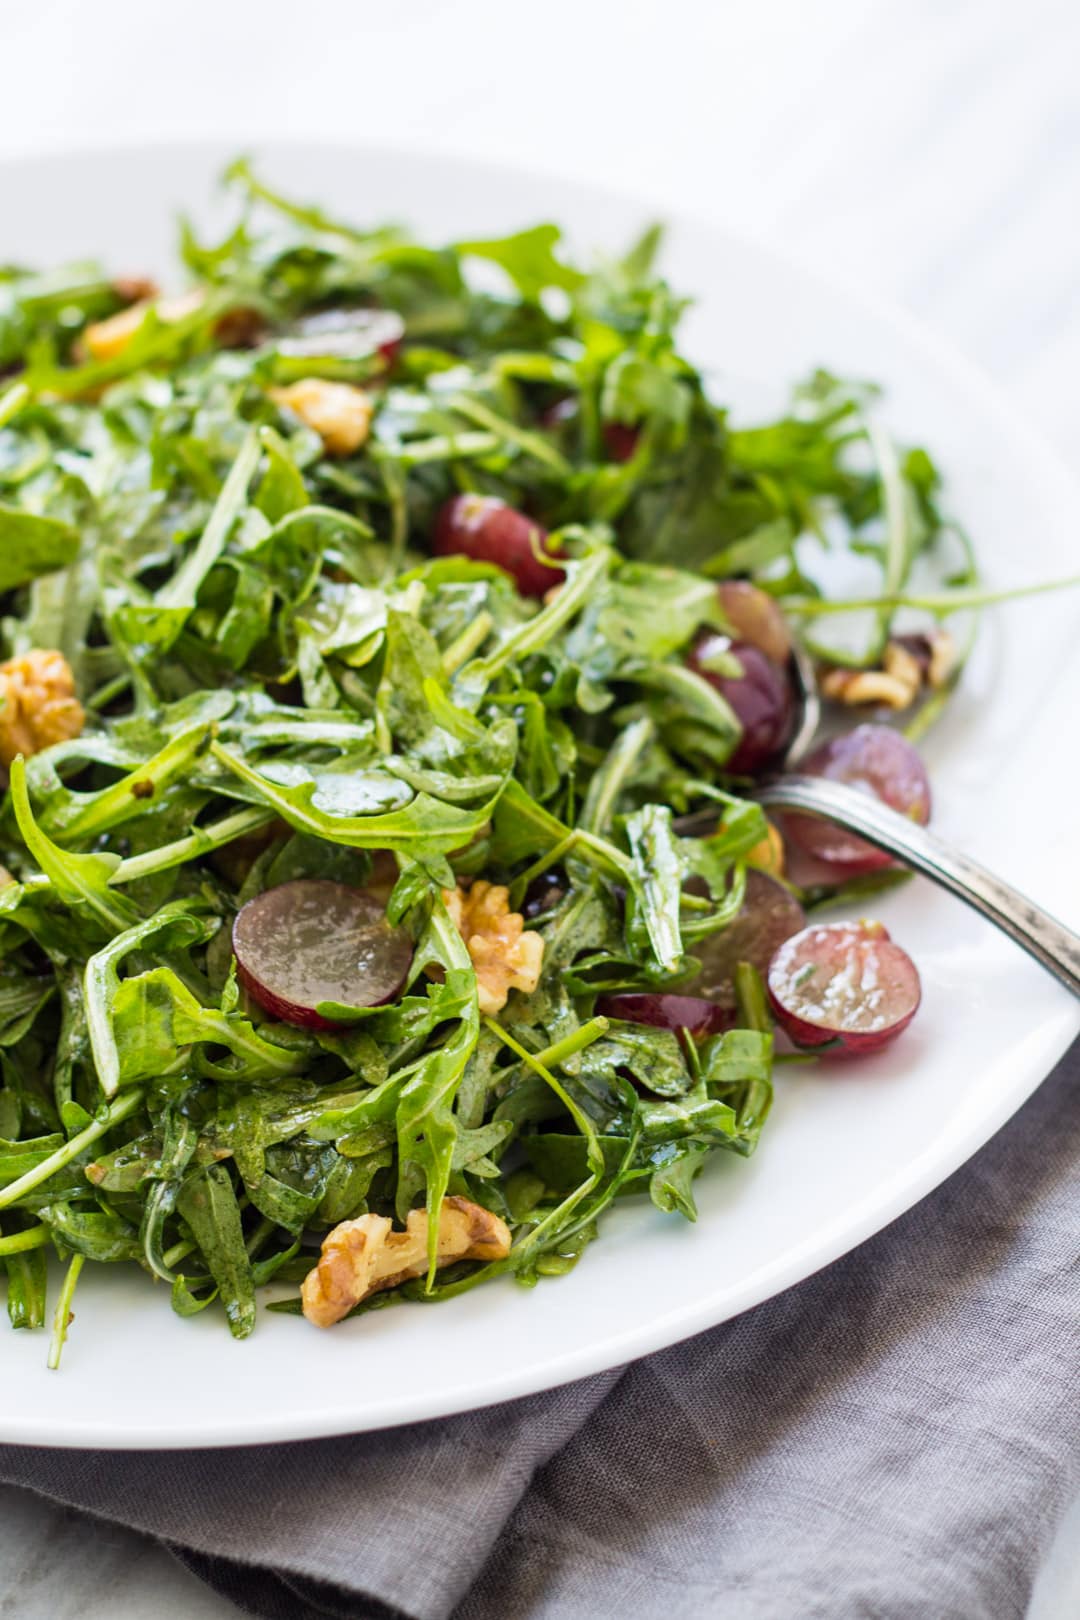 A lightly-dressed salad with arugula, halved grapes, and walnuts.